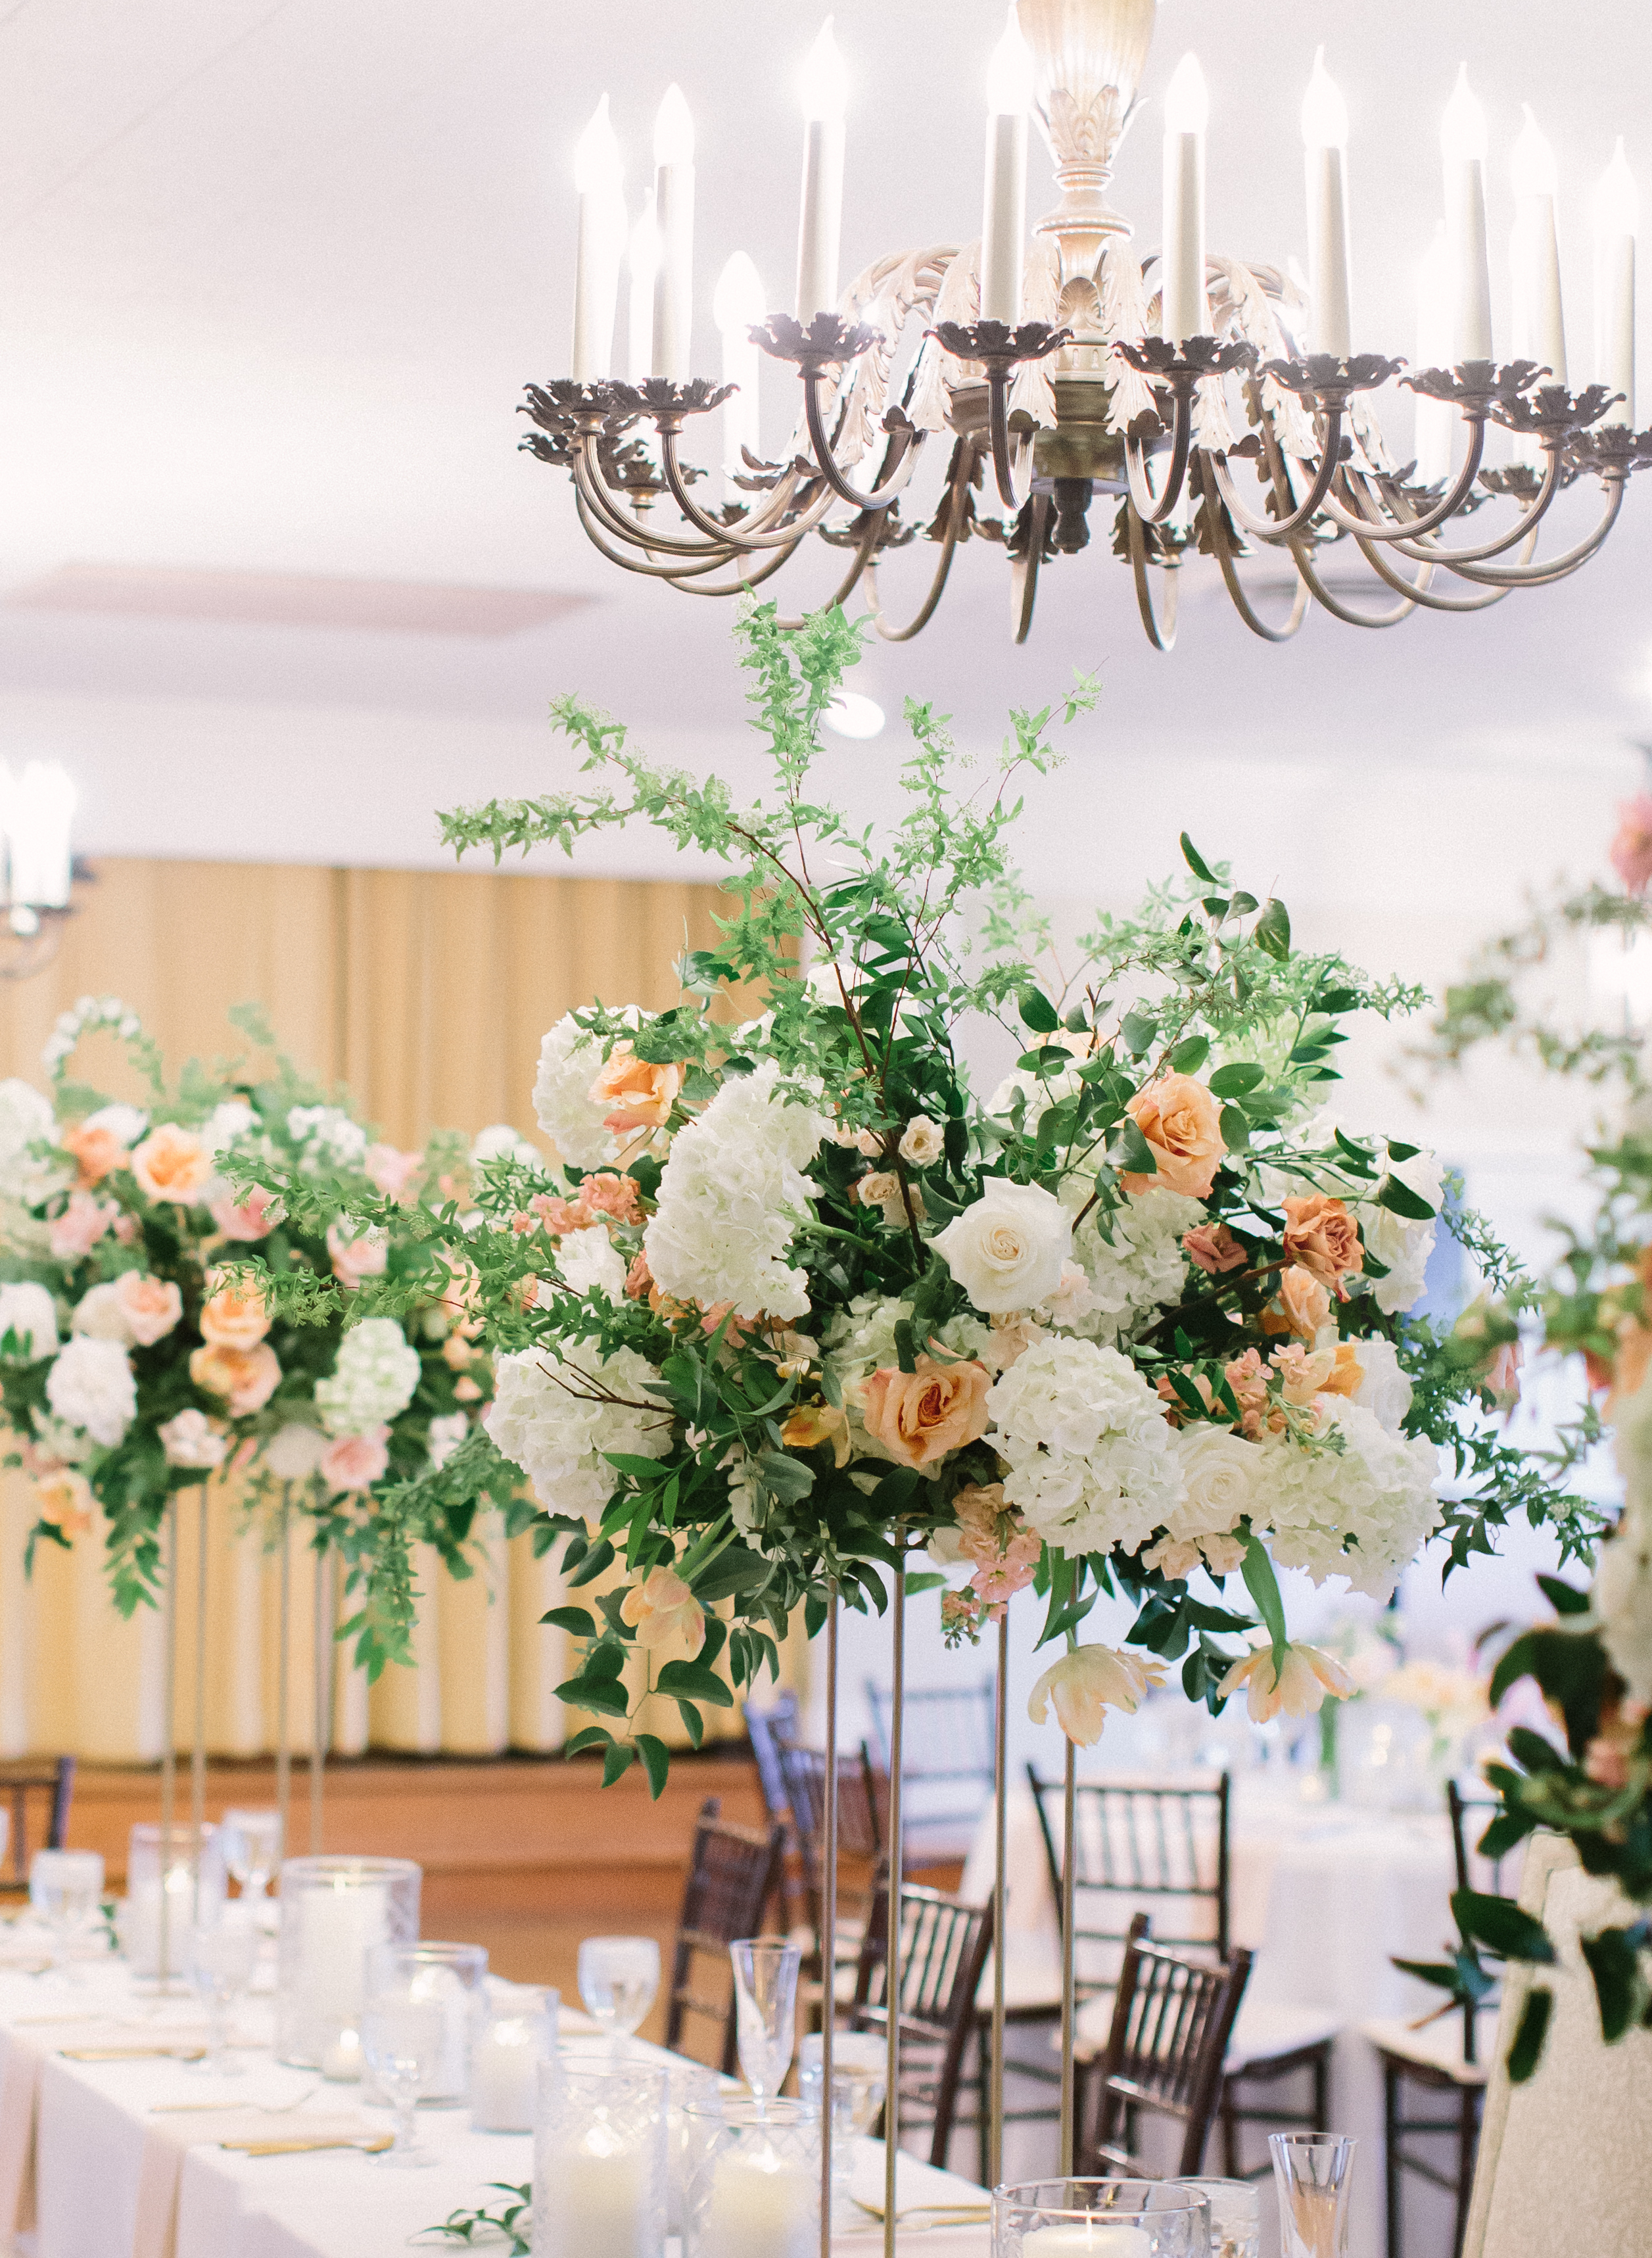 A wedding reception room is decorated with greenery and tall floral centerpieces with cream, peach and pink flowers for an early spring romance wedding.